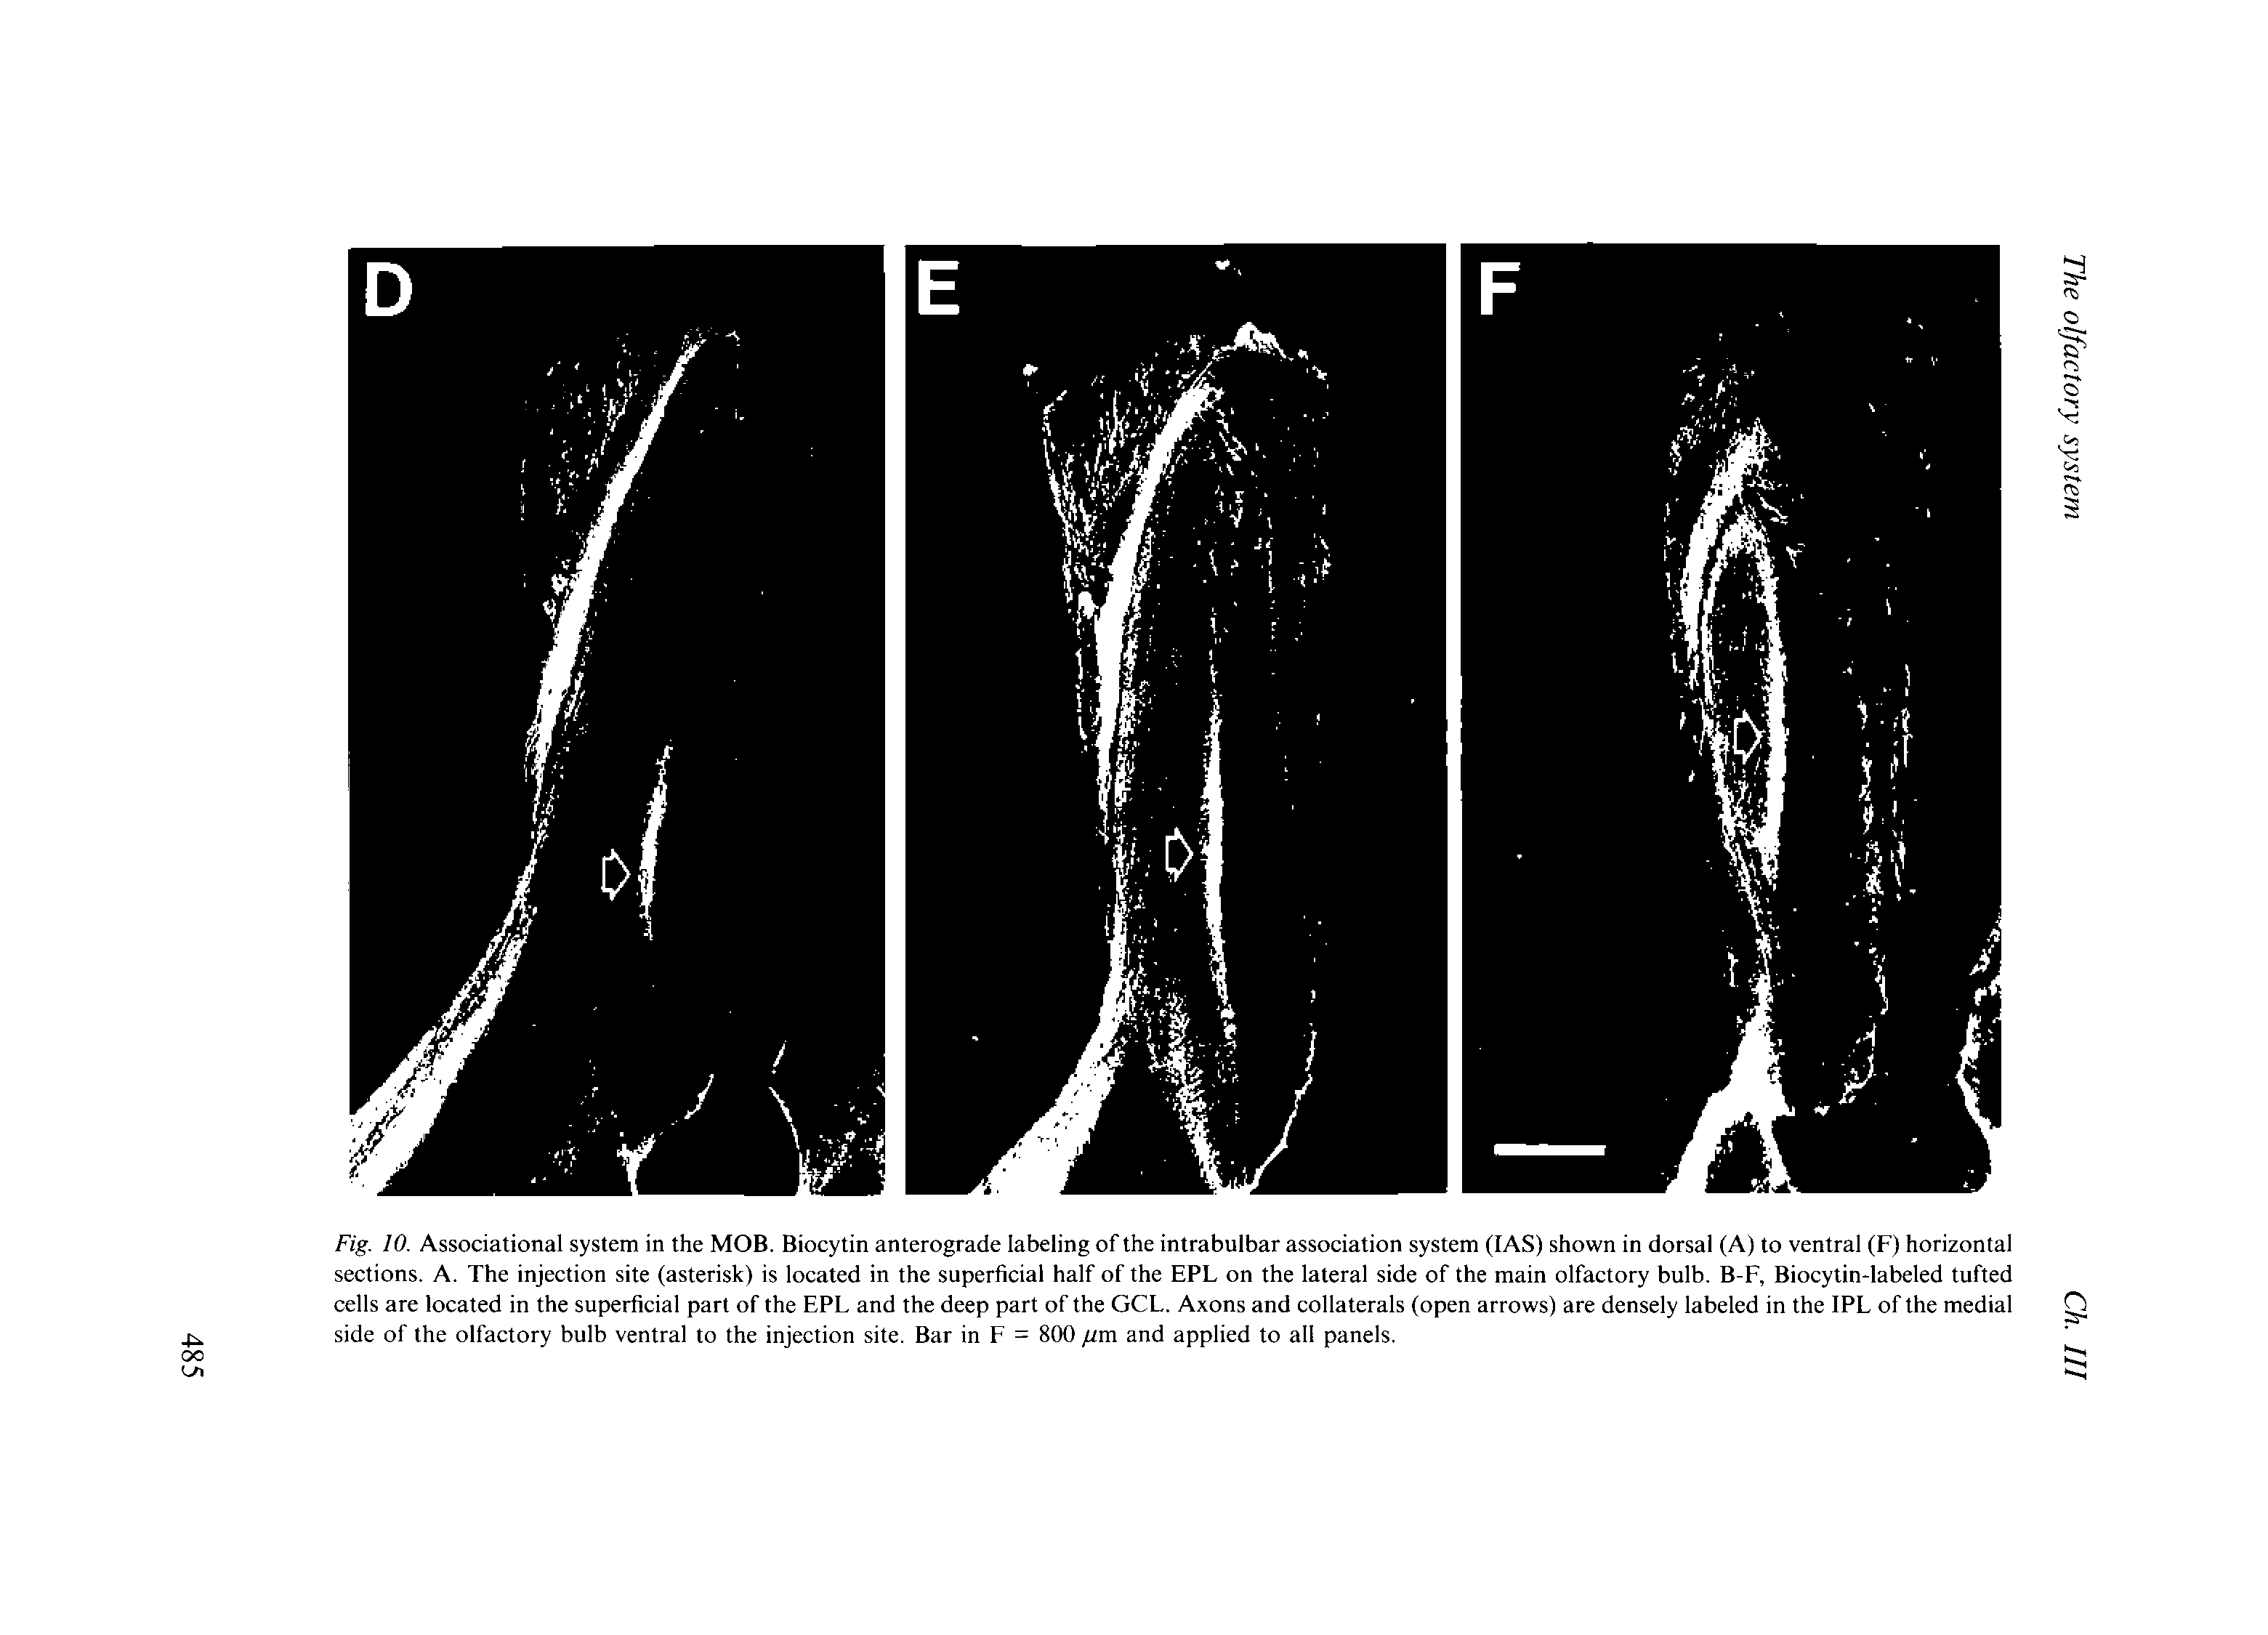 Fig. 10. Associational system in the MOB. Biocytin anterograde labeling of the inlrabulbar association system (IAS) shown in dorsal (A) to ventral (F) horizontal sections. A. The injection site (asterisk) is located in the superficial half of the EPL on the lateral side of the main olfactory bulb. B-F, Biocytin-labeled tufted cells are located in the superficial part of the EPL and the deep part of the GCL. Axons and collaterals (open arrows) are densely labeled in the IPL of the medial side of the olfactory bulb ventral to the injection site. Bar in F = 800 fim and applied to all panels.